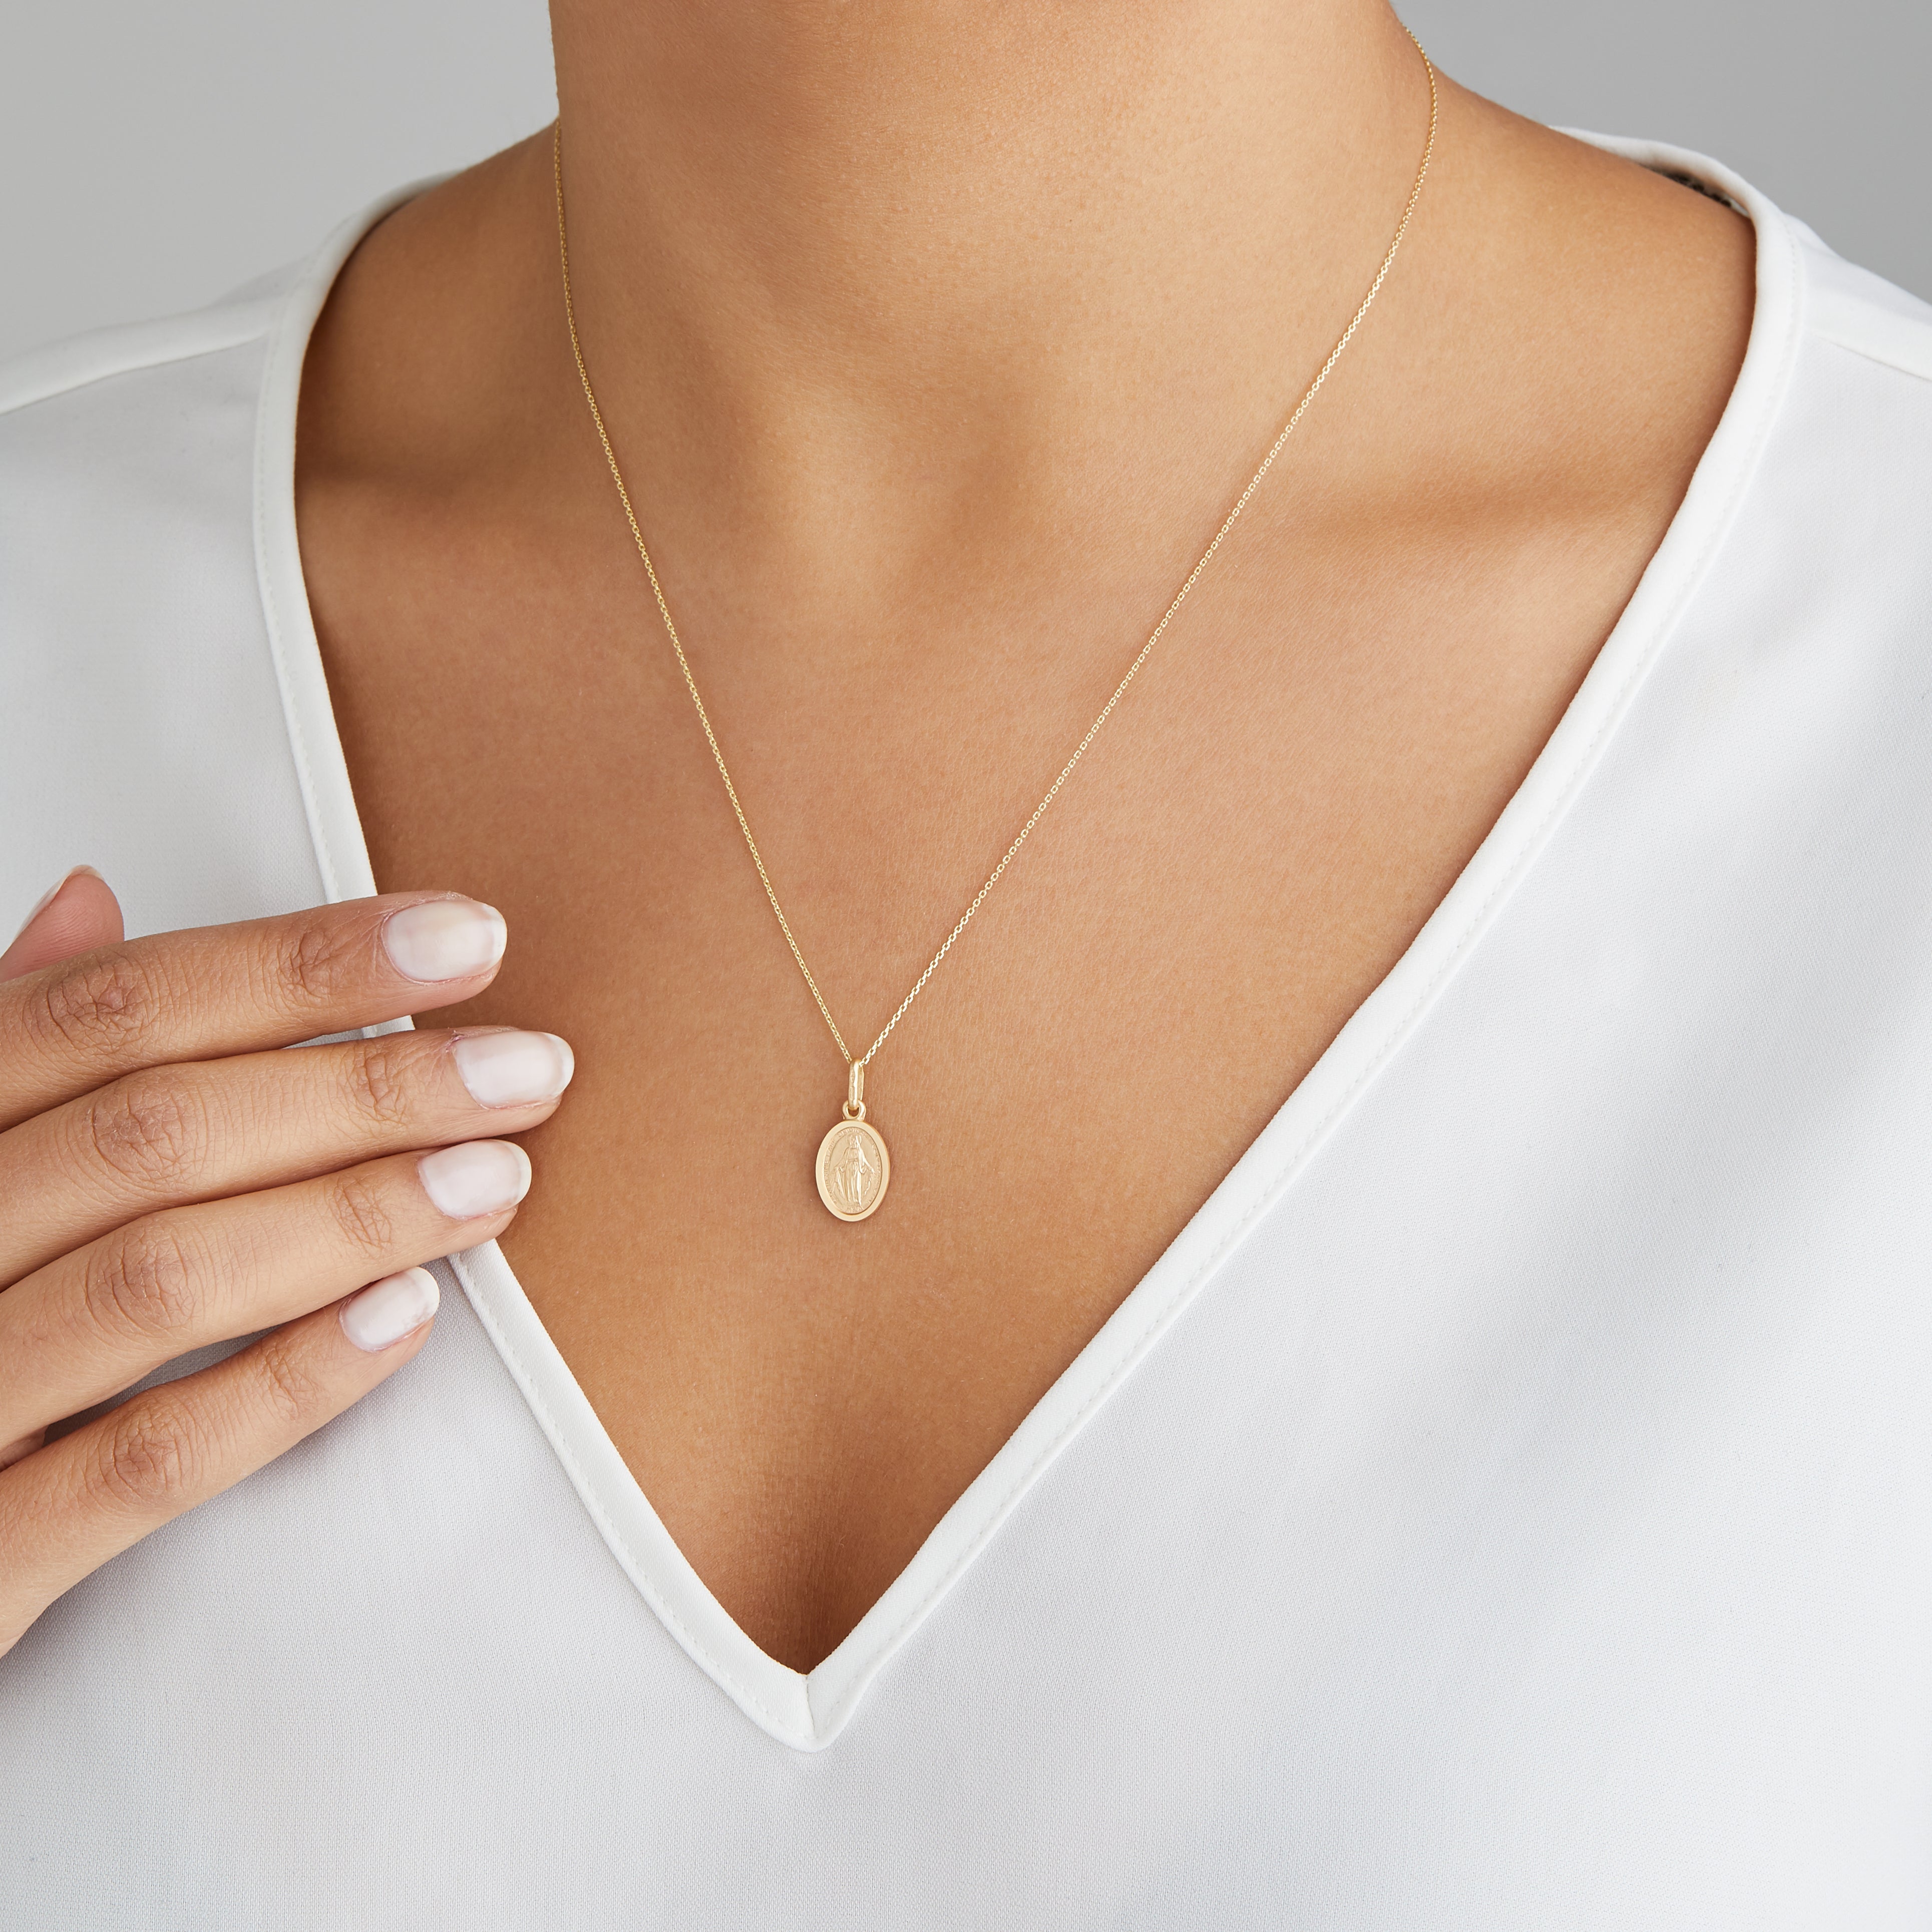 Gold small virgin mary necklace around the neck of a woman wearing a white V-neck top